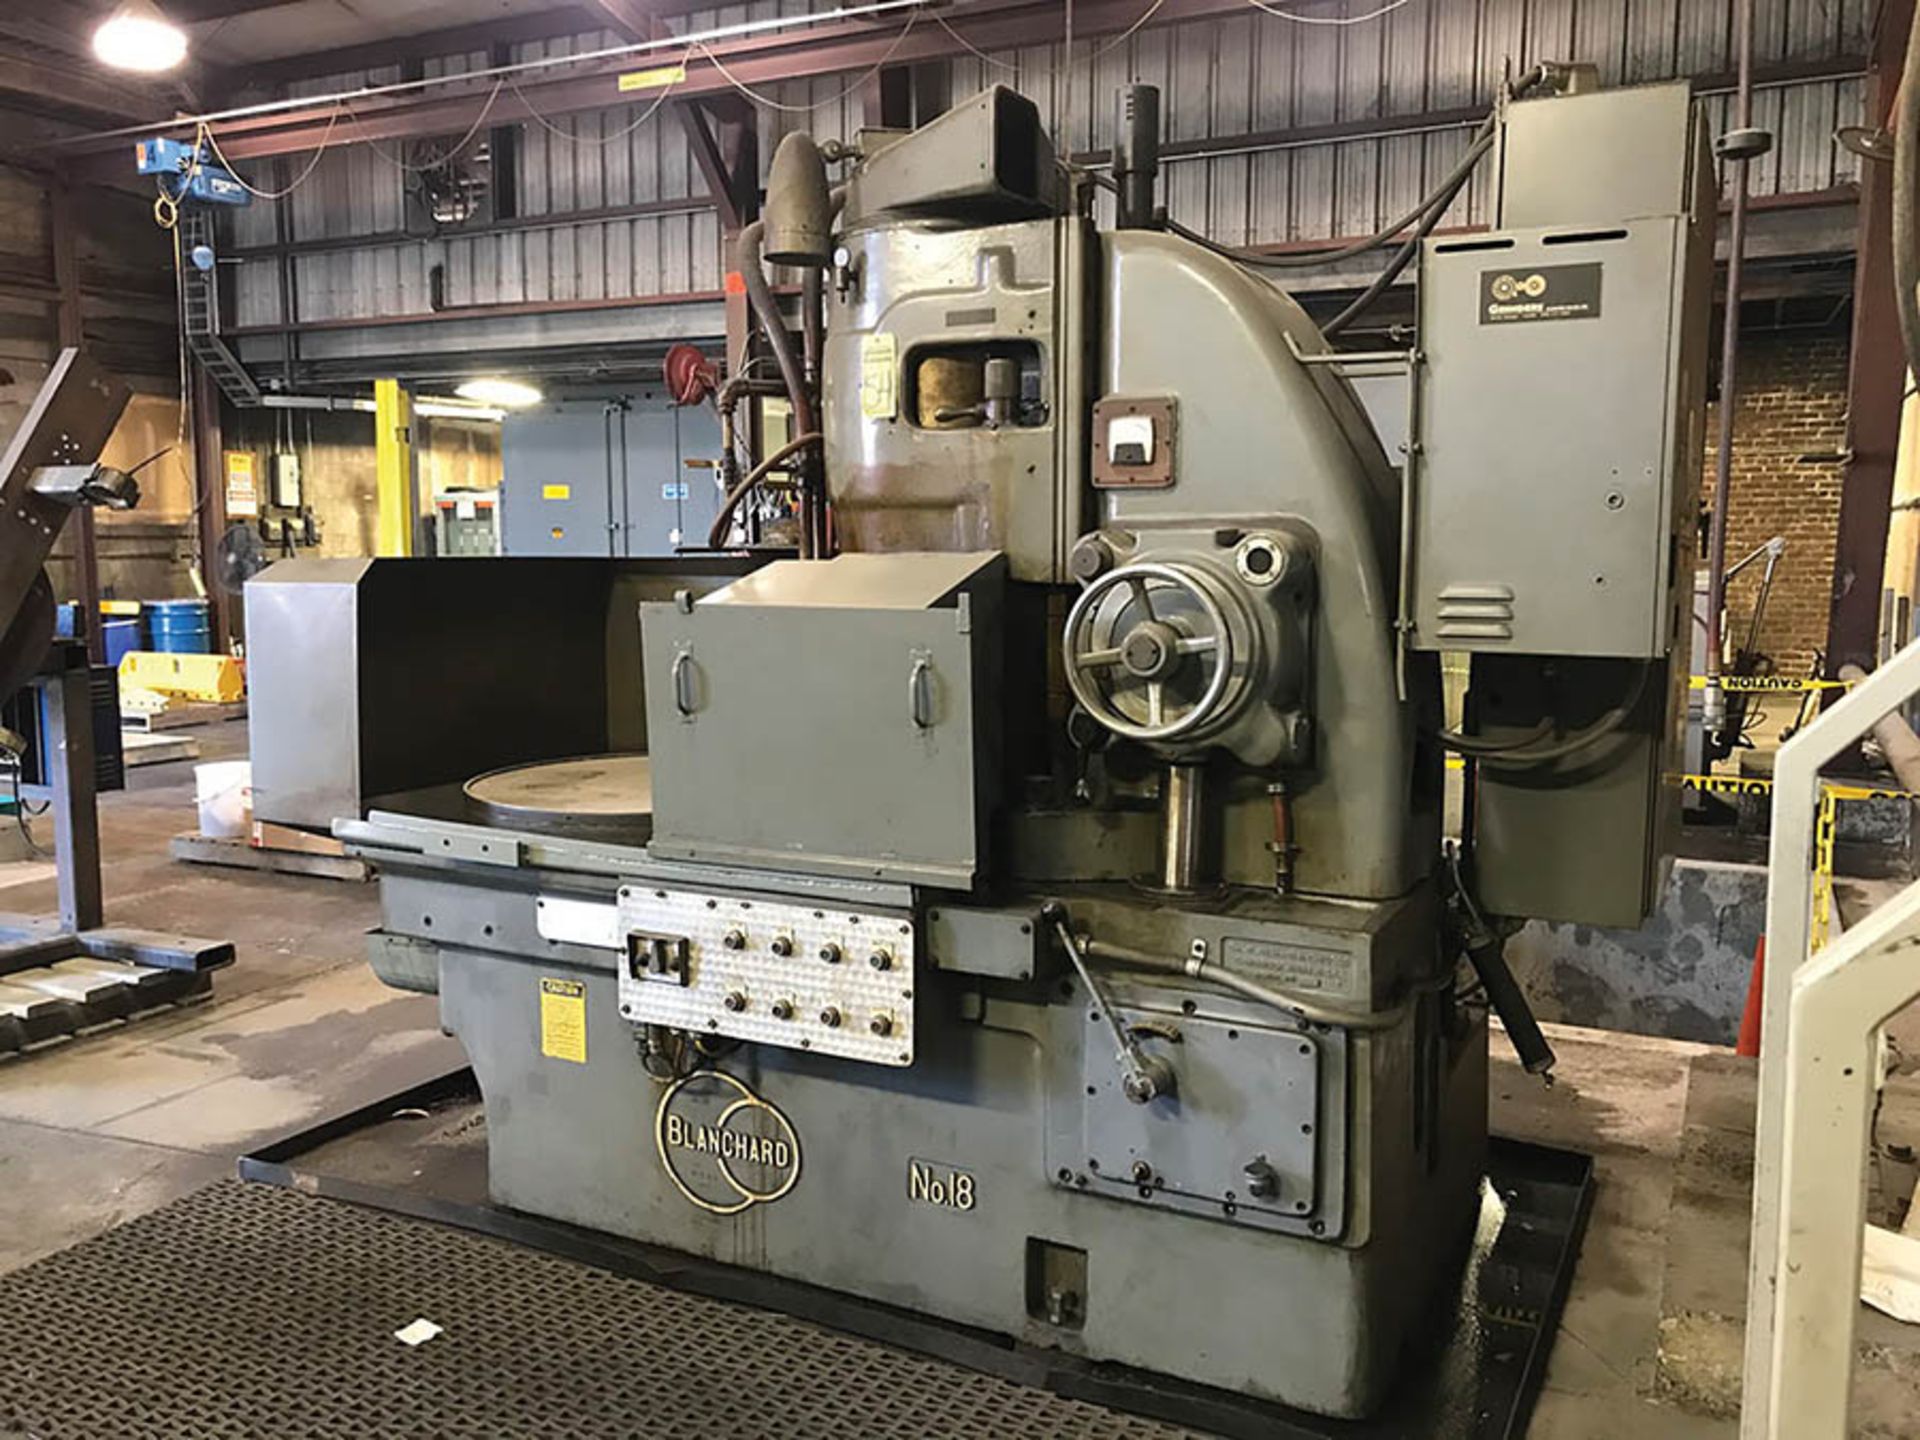 BLANCHARD 18'' ROTARY SURFACE GRINDER, MODEL NO. 18, 36'' ELECTROMAGNETIC CHUCK, 720 MAX WHEEL - Image 3 of 7